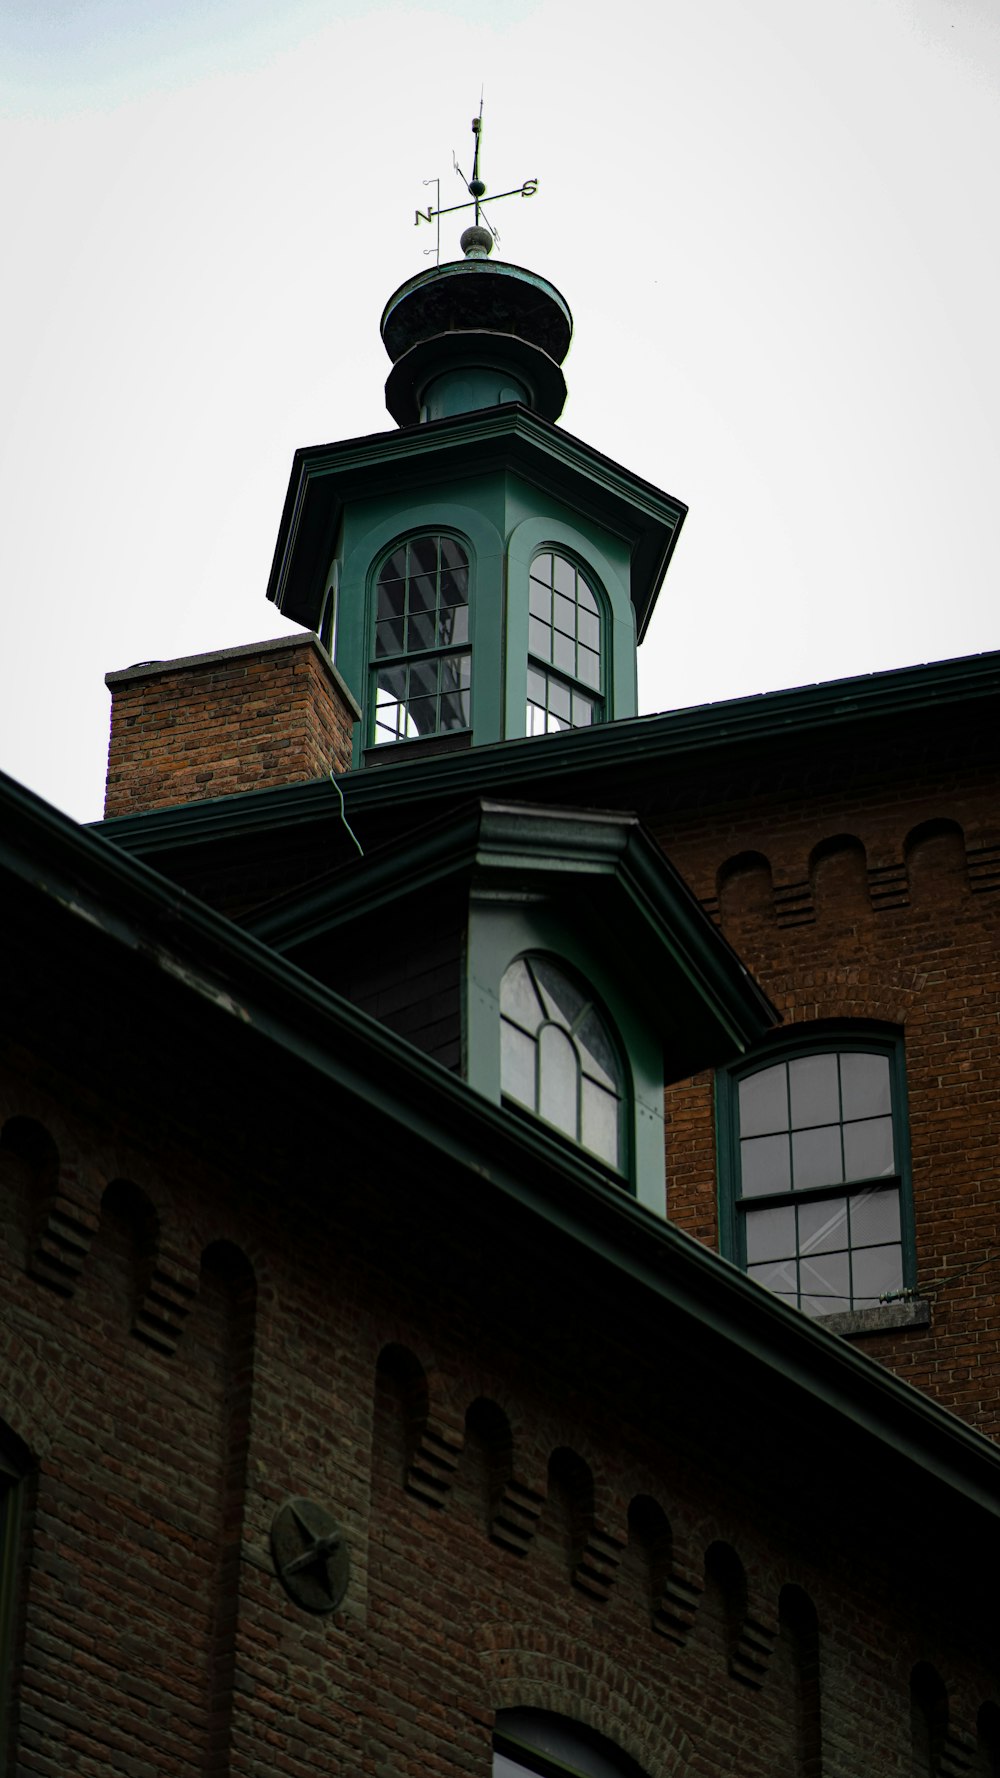 a clock tower on top of a brick building